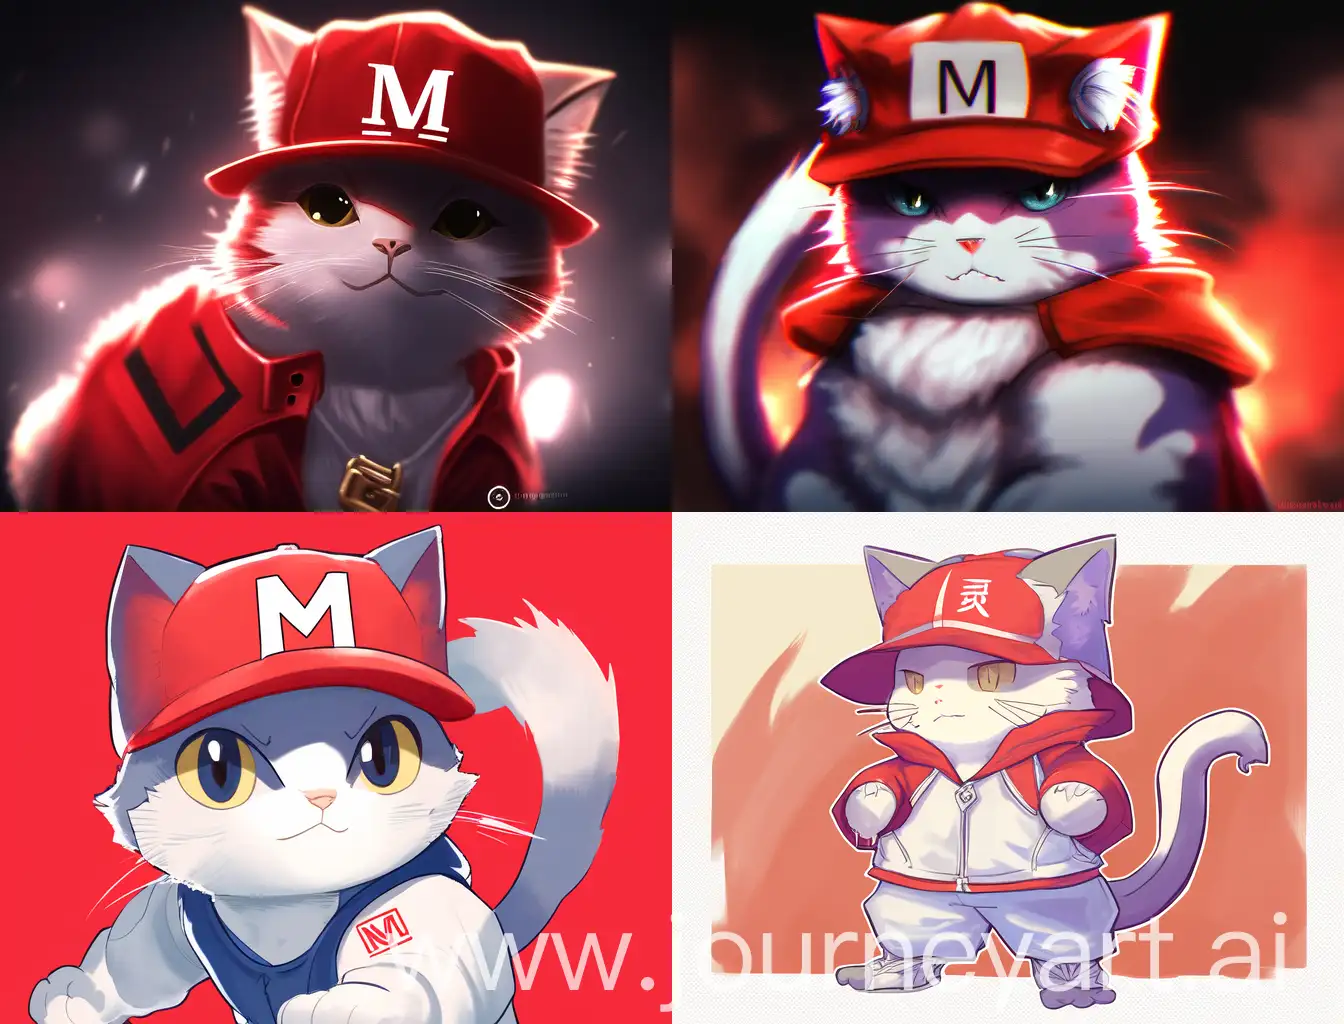 Playful-Cat-Wearing-Red-Cap-with-Letter-M-Emblem